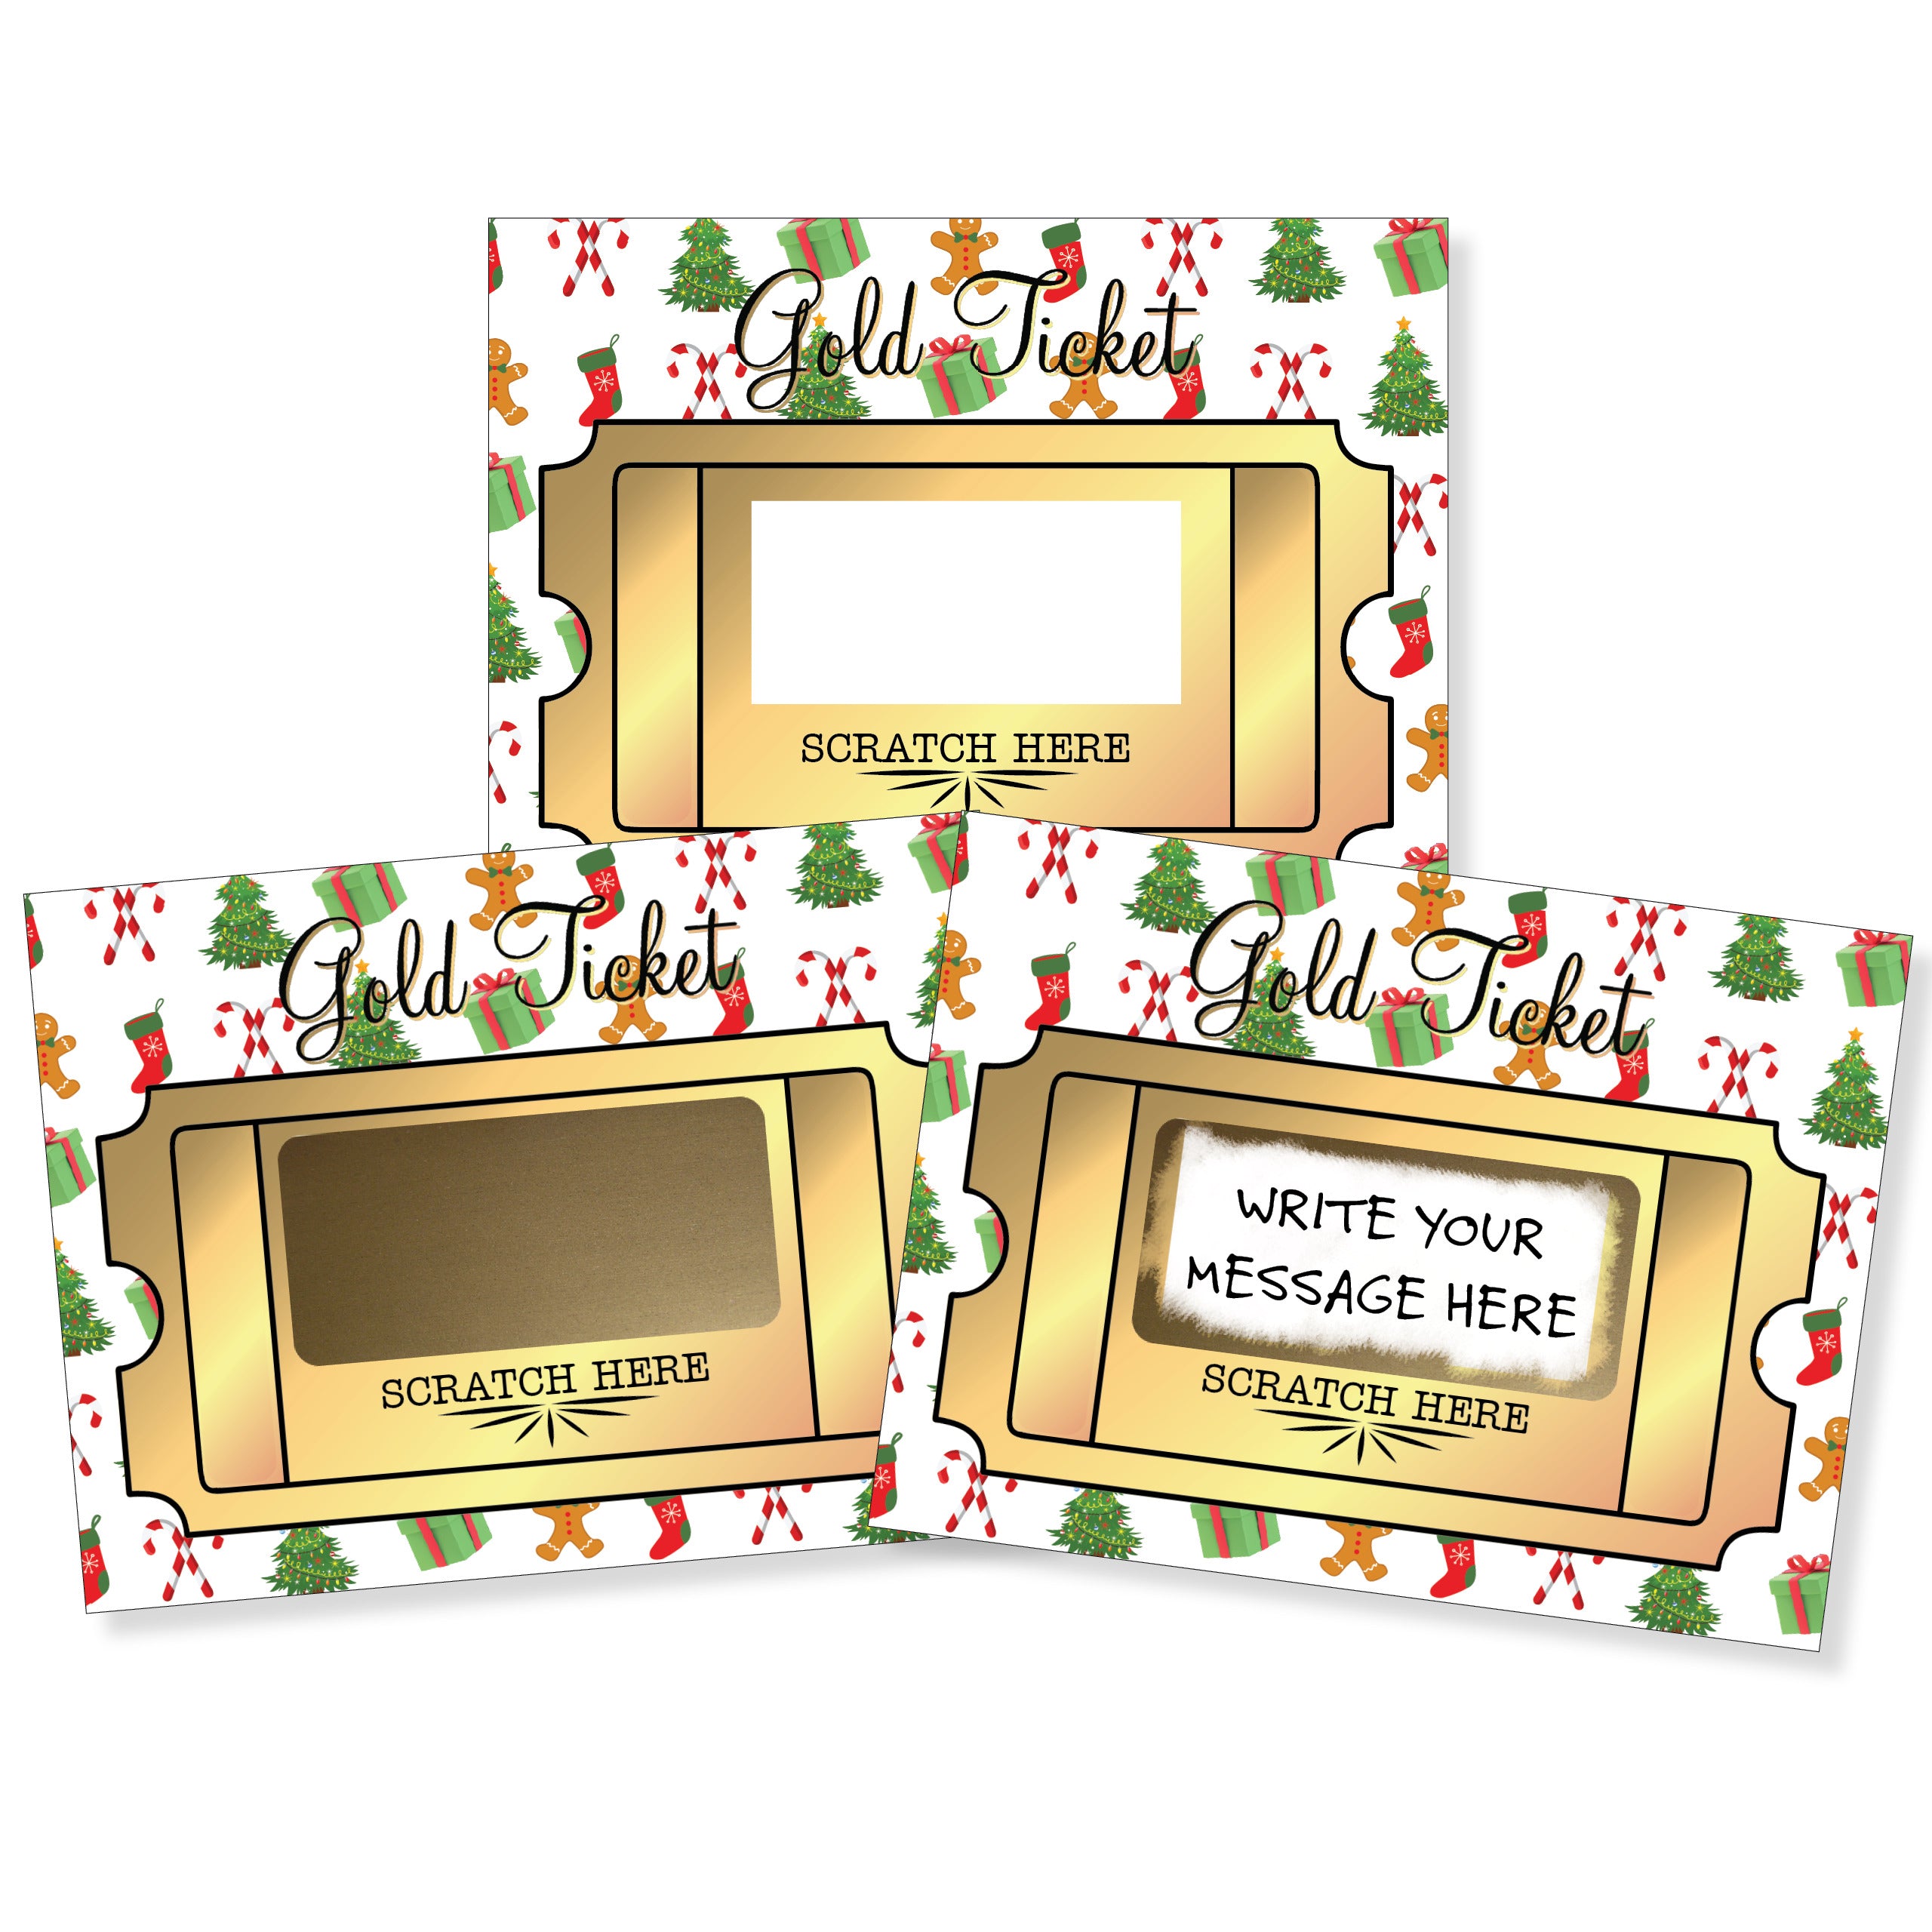 DIY Christmas Gold Ticket Classic Make Your Own Scratch Offs - 50 Cards and 50 Scratch Off Stickers - My Scratch Offs